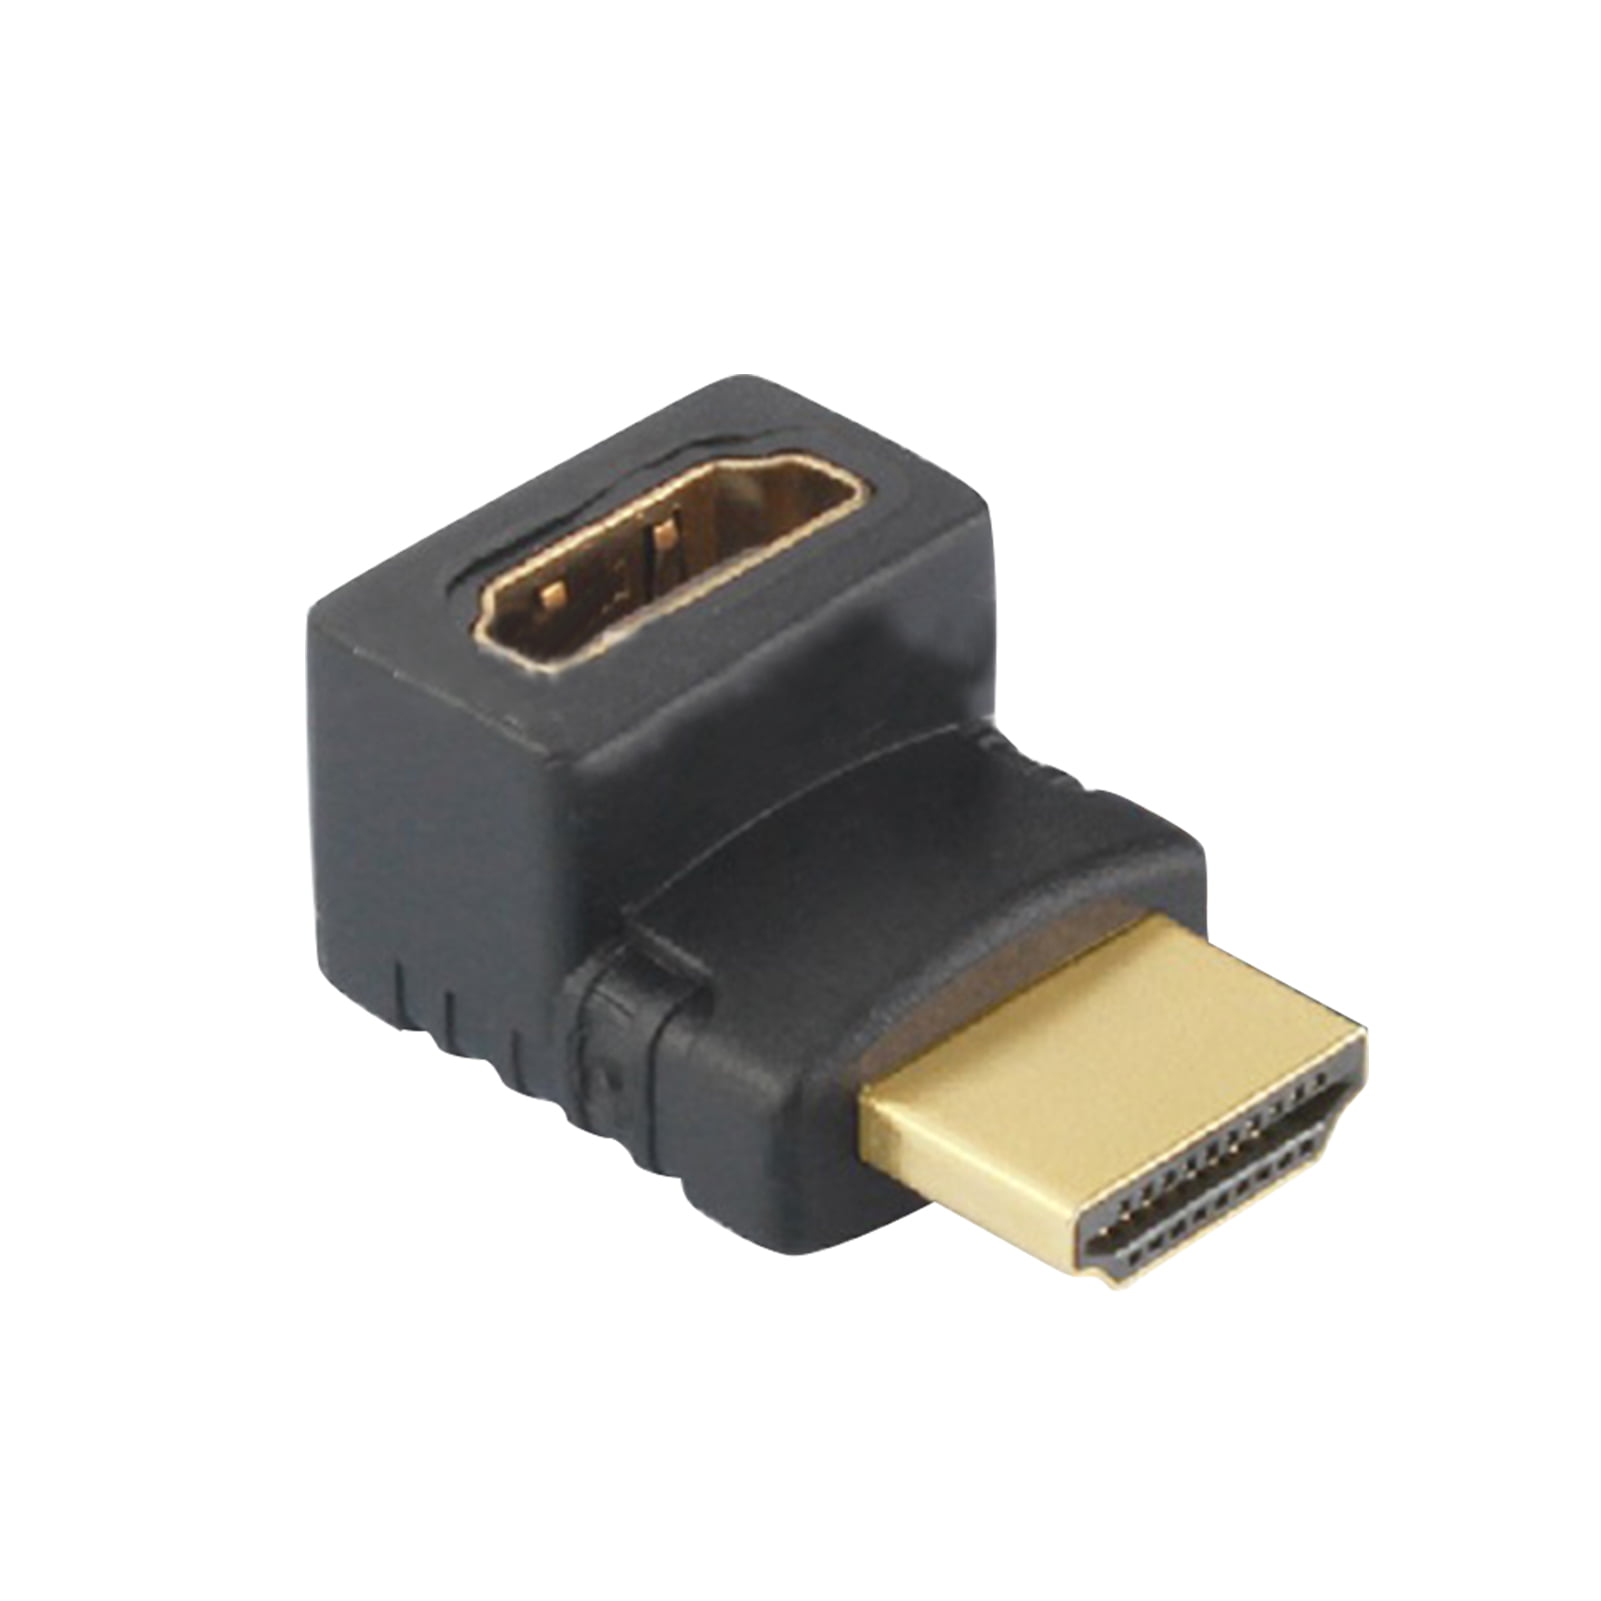 3 HDMI 1.4 Right Angle Adapter 90 Degree for 4K 3D 1080p TV LCD HDTV 300+SOLD